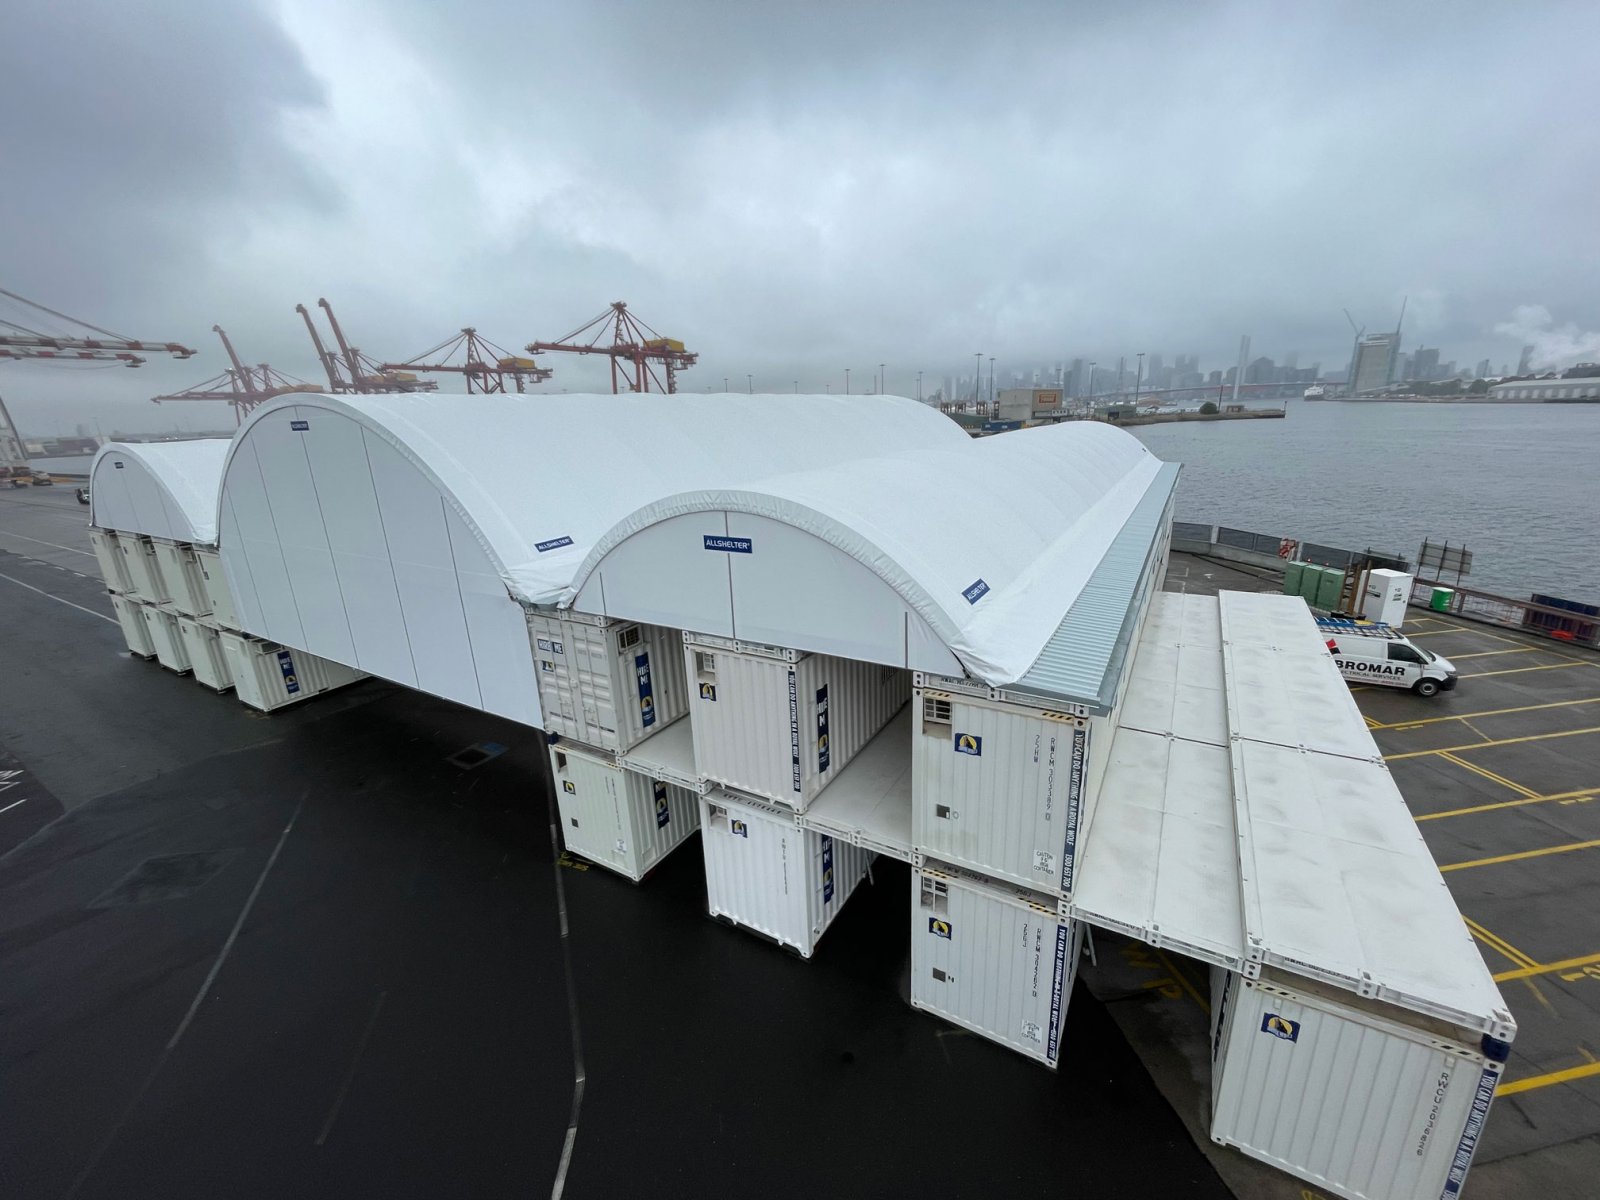 Royal Wolf, in conjunction with McConnell Dowell, has provided 53 containers to be used as key facilities for up to 230 workers on the Swanson Dock West Remediation Project in Melbourne.